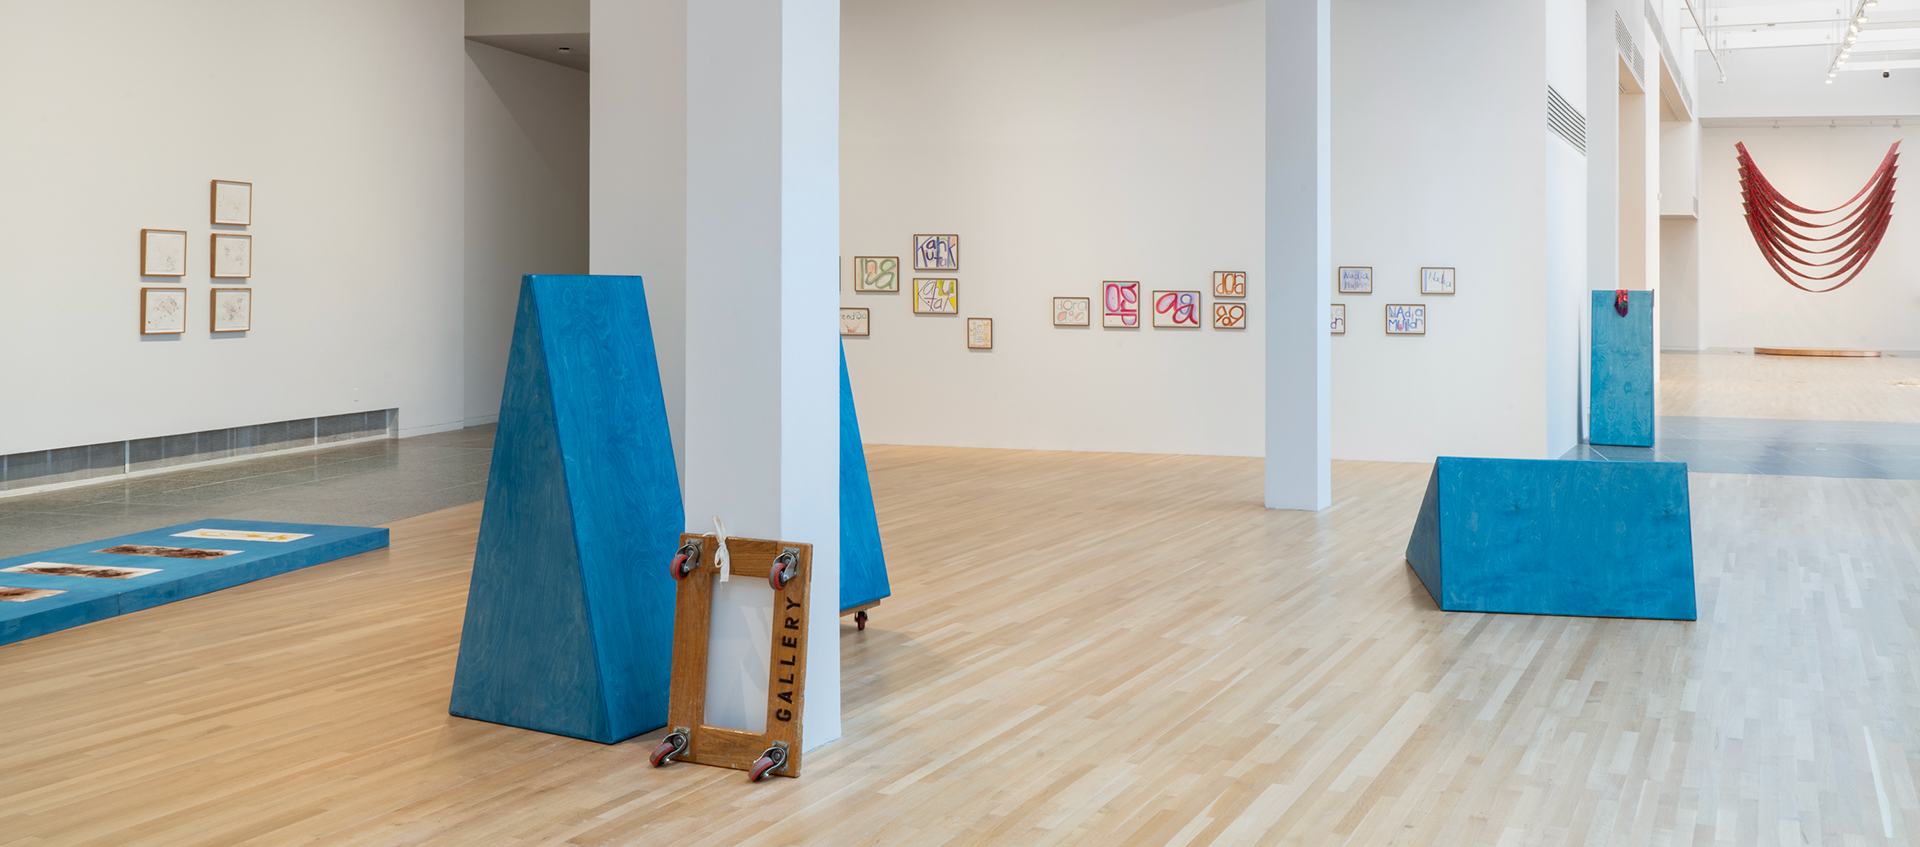 Gallery view of four freestanding triangular blue sculptures, prints displayed on a riser and the walls, and a hanging, U-shaped, red fabric work.